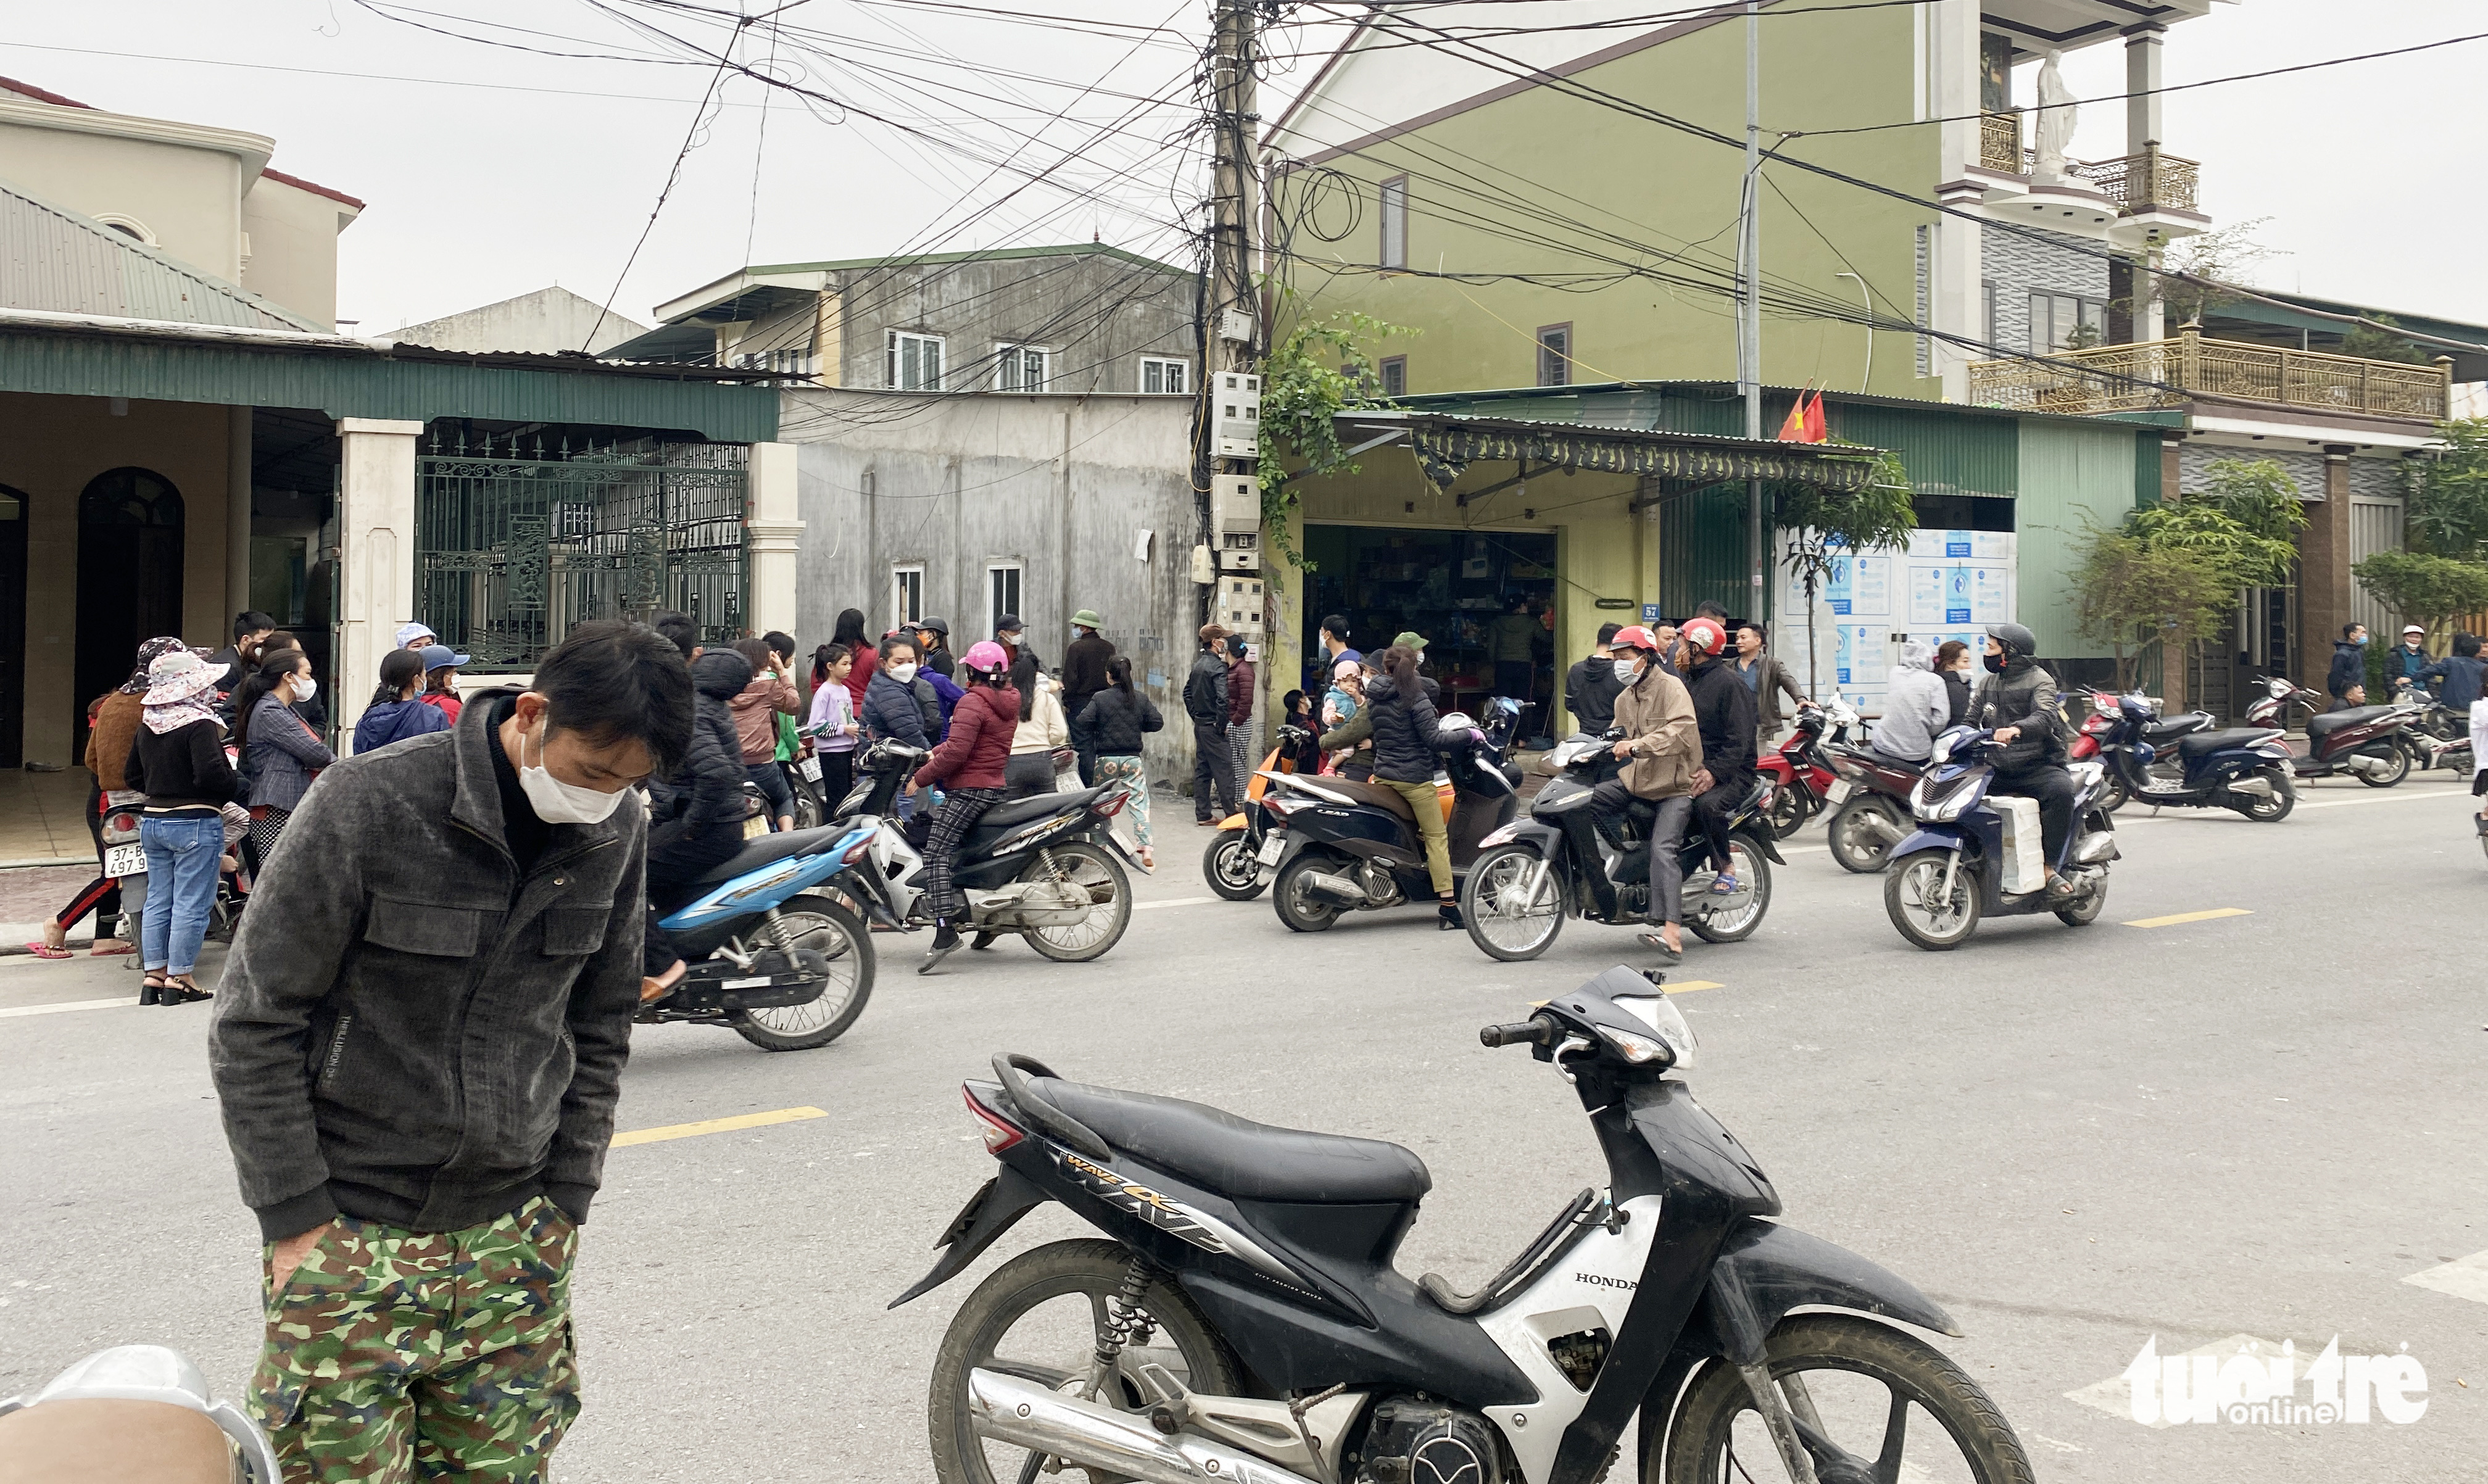 Onlookers gather at the scene of a house explosion allegedly caused by homemade firecrackers in Vinh City, Nghe An Province, Vietnam, December 13, 2021. Photo: Doan Hoa / Tuoi Tre